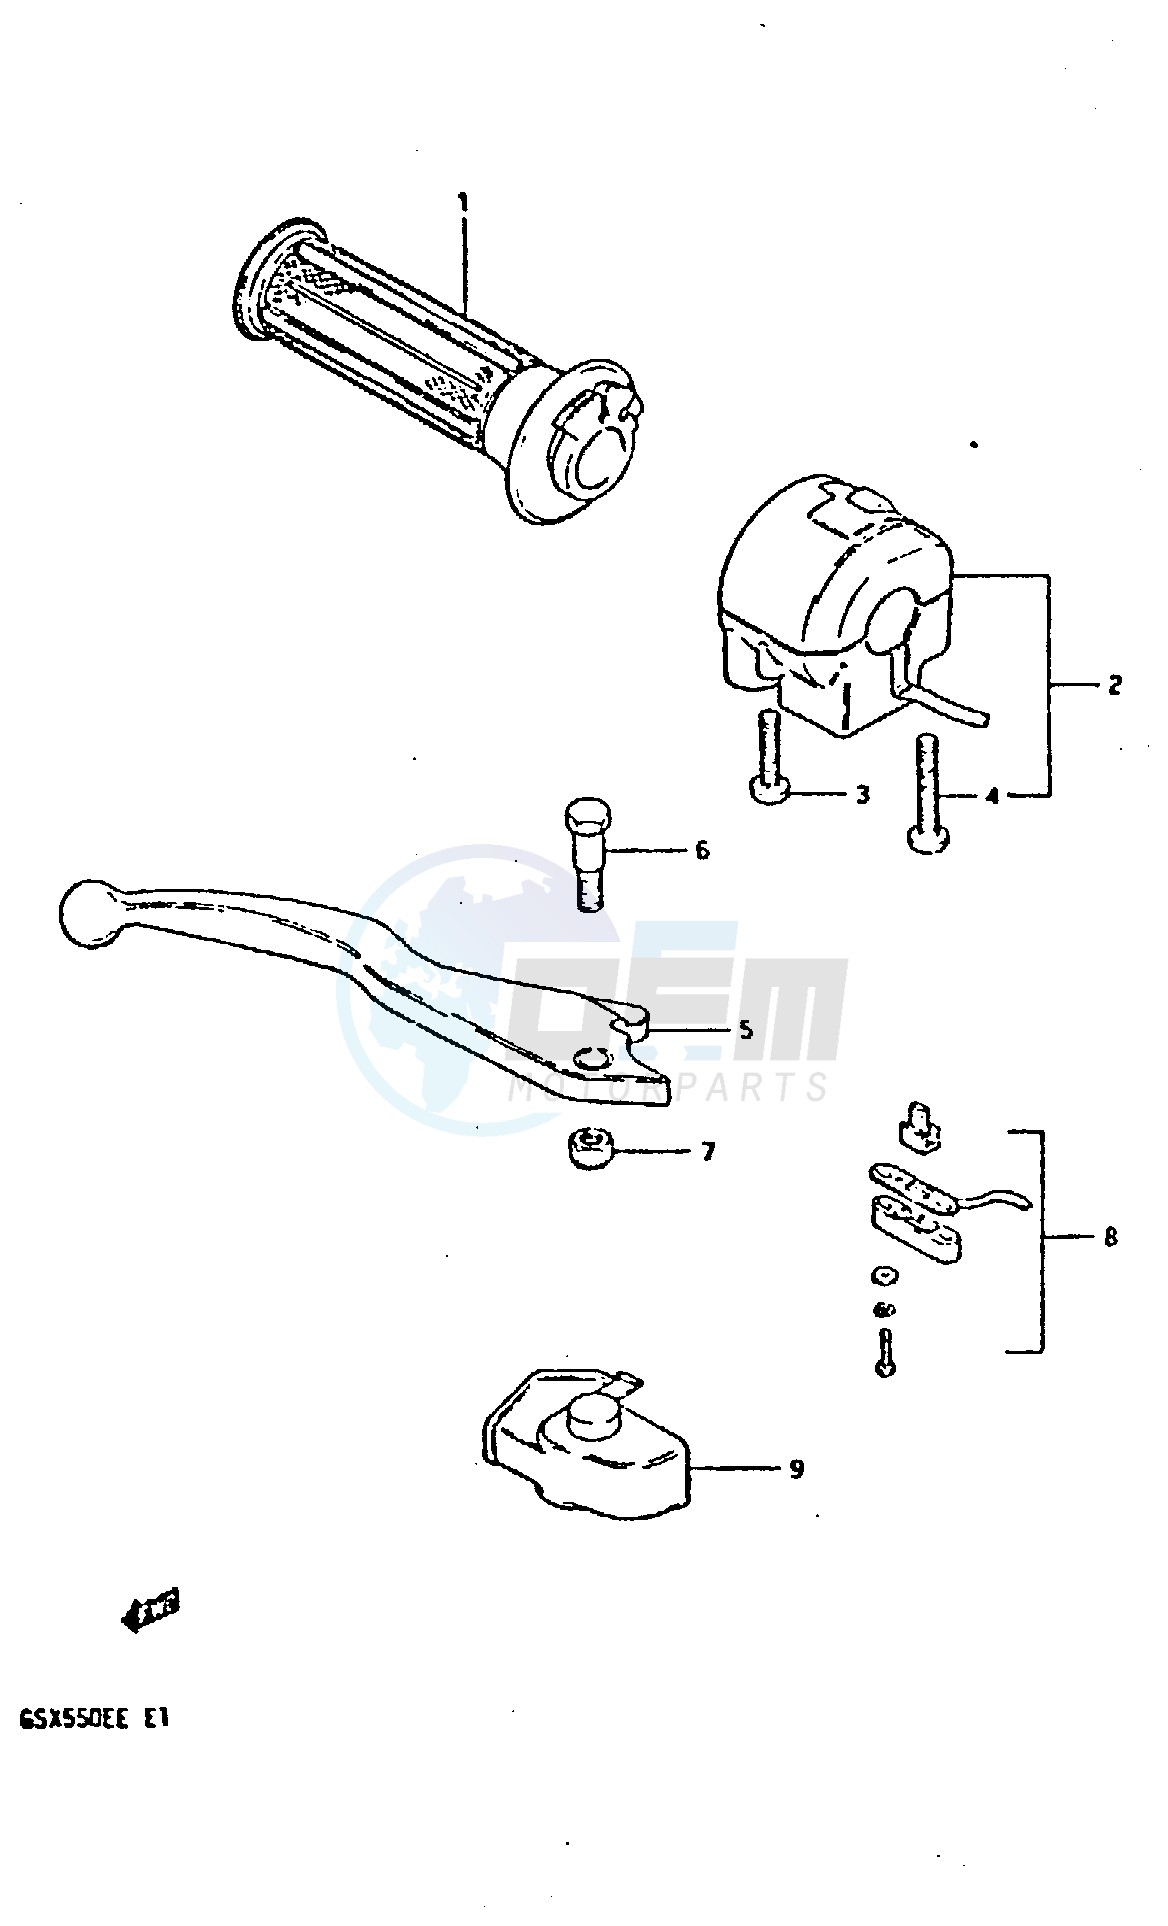 RIGHT HANDLE SWITCH (GSX550ESD ESE EFE) blueprint